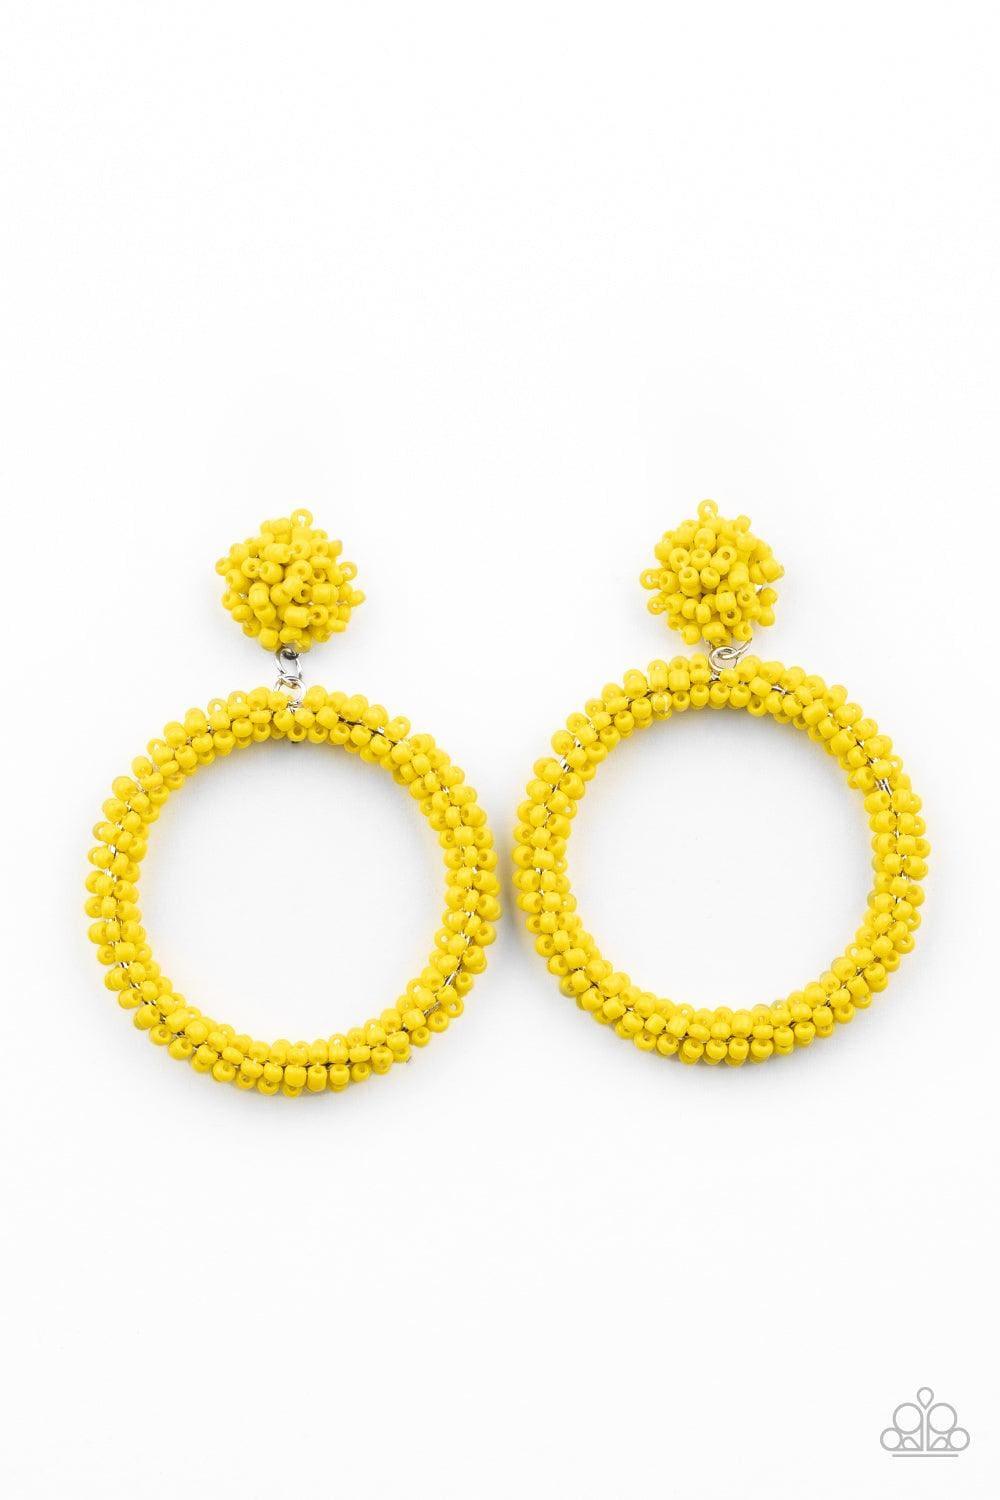 Paparazzi Accessories - Be All You Can Bead - Yellow Earrings - Bling by JessieK